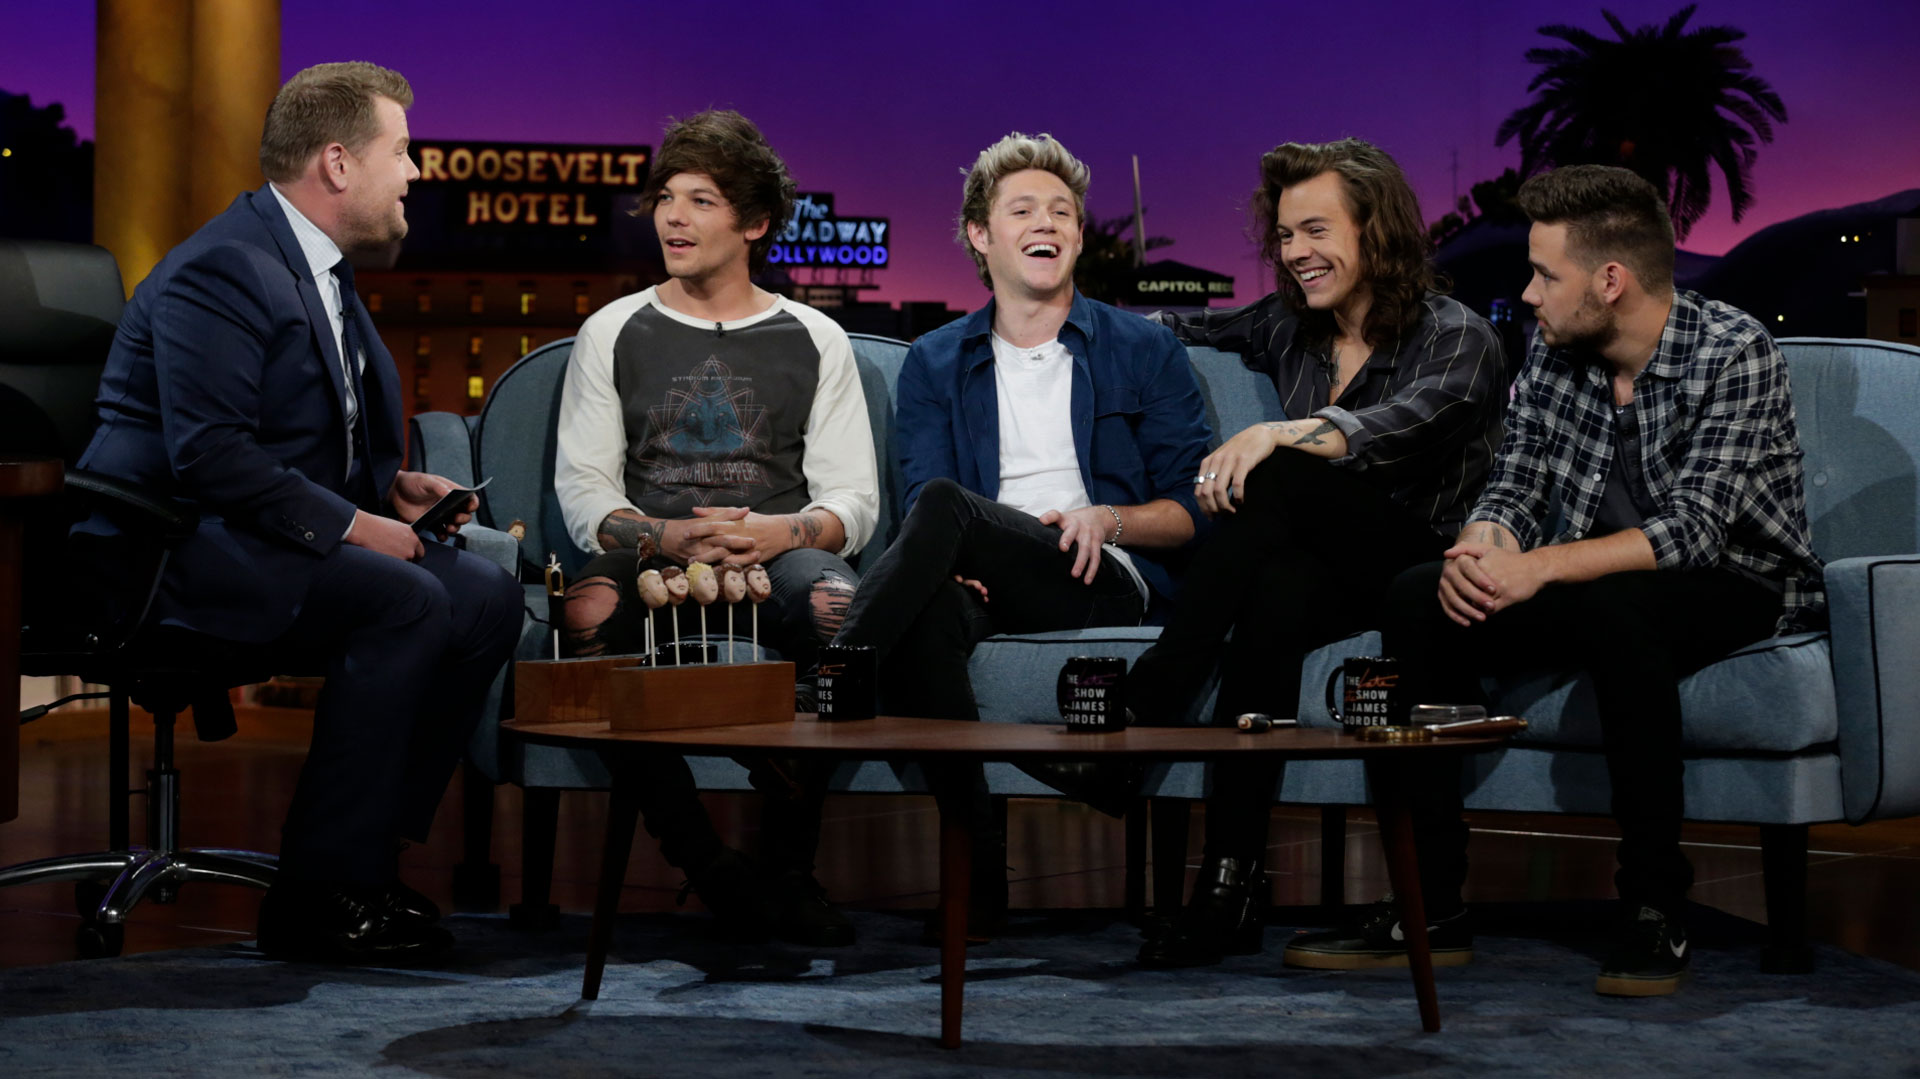 james corden one direction history